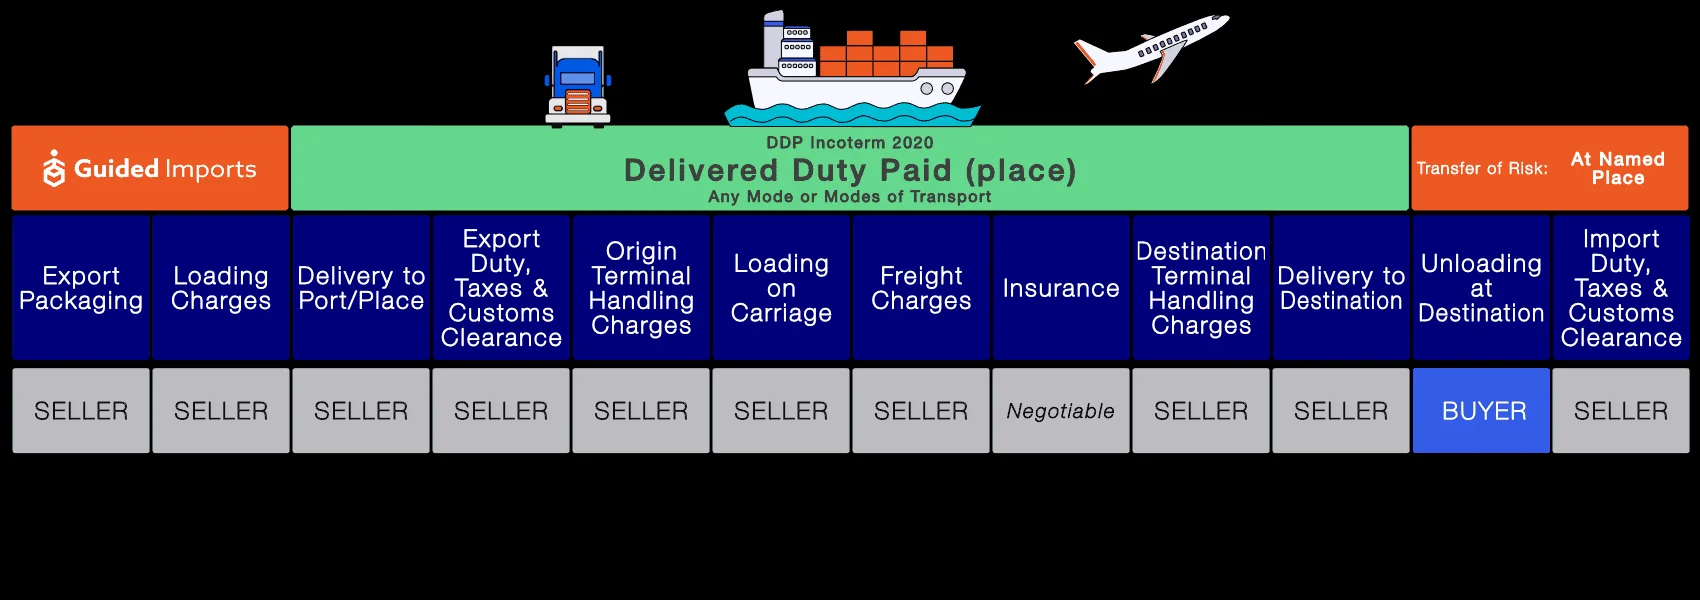 East Shipping To Nigeria Chinese Shipping Agent Freight Forwarder DDP Double Clearance Tax Air Freight Ship To Nigeria factory